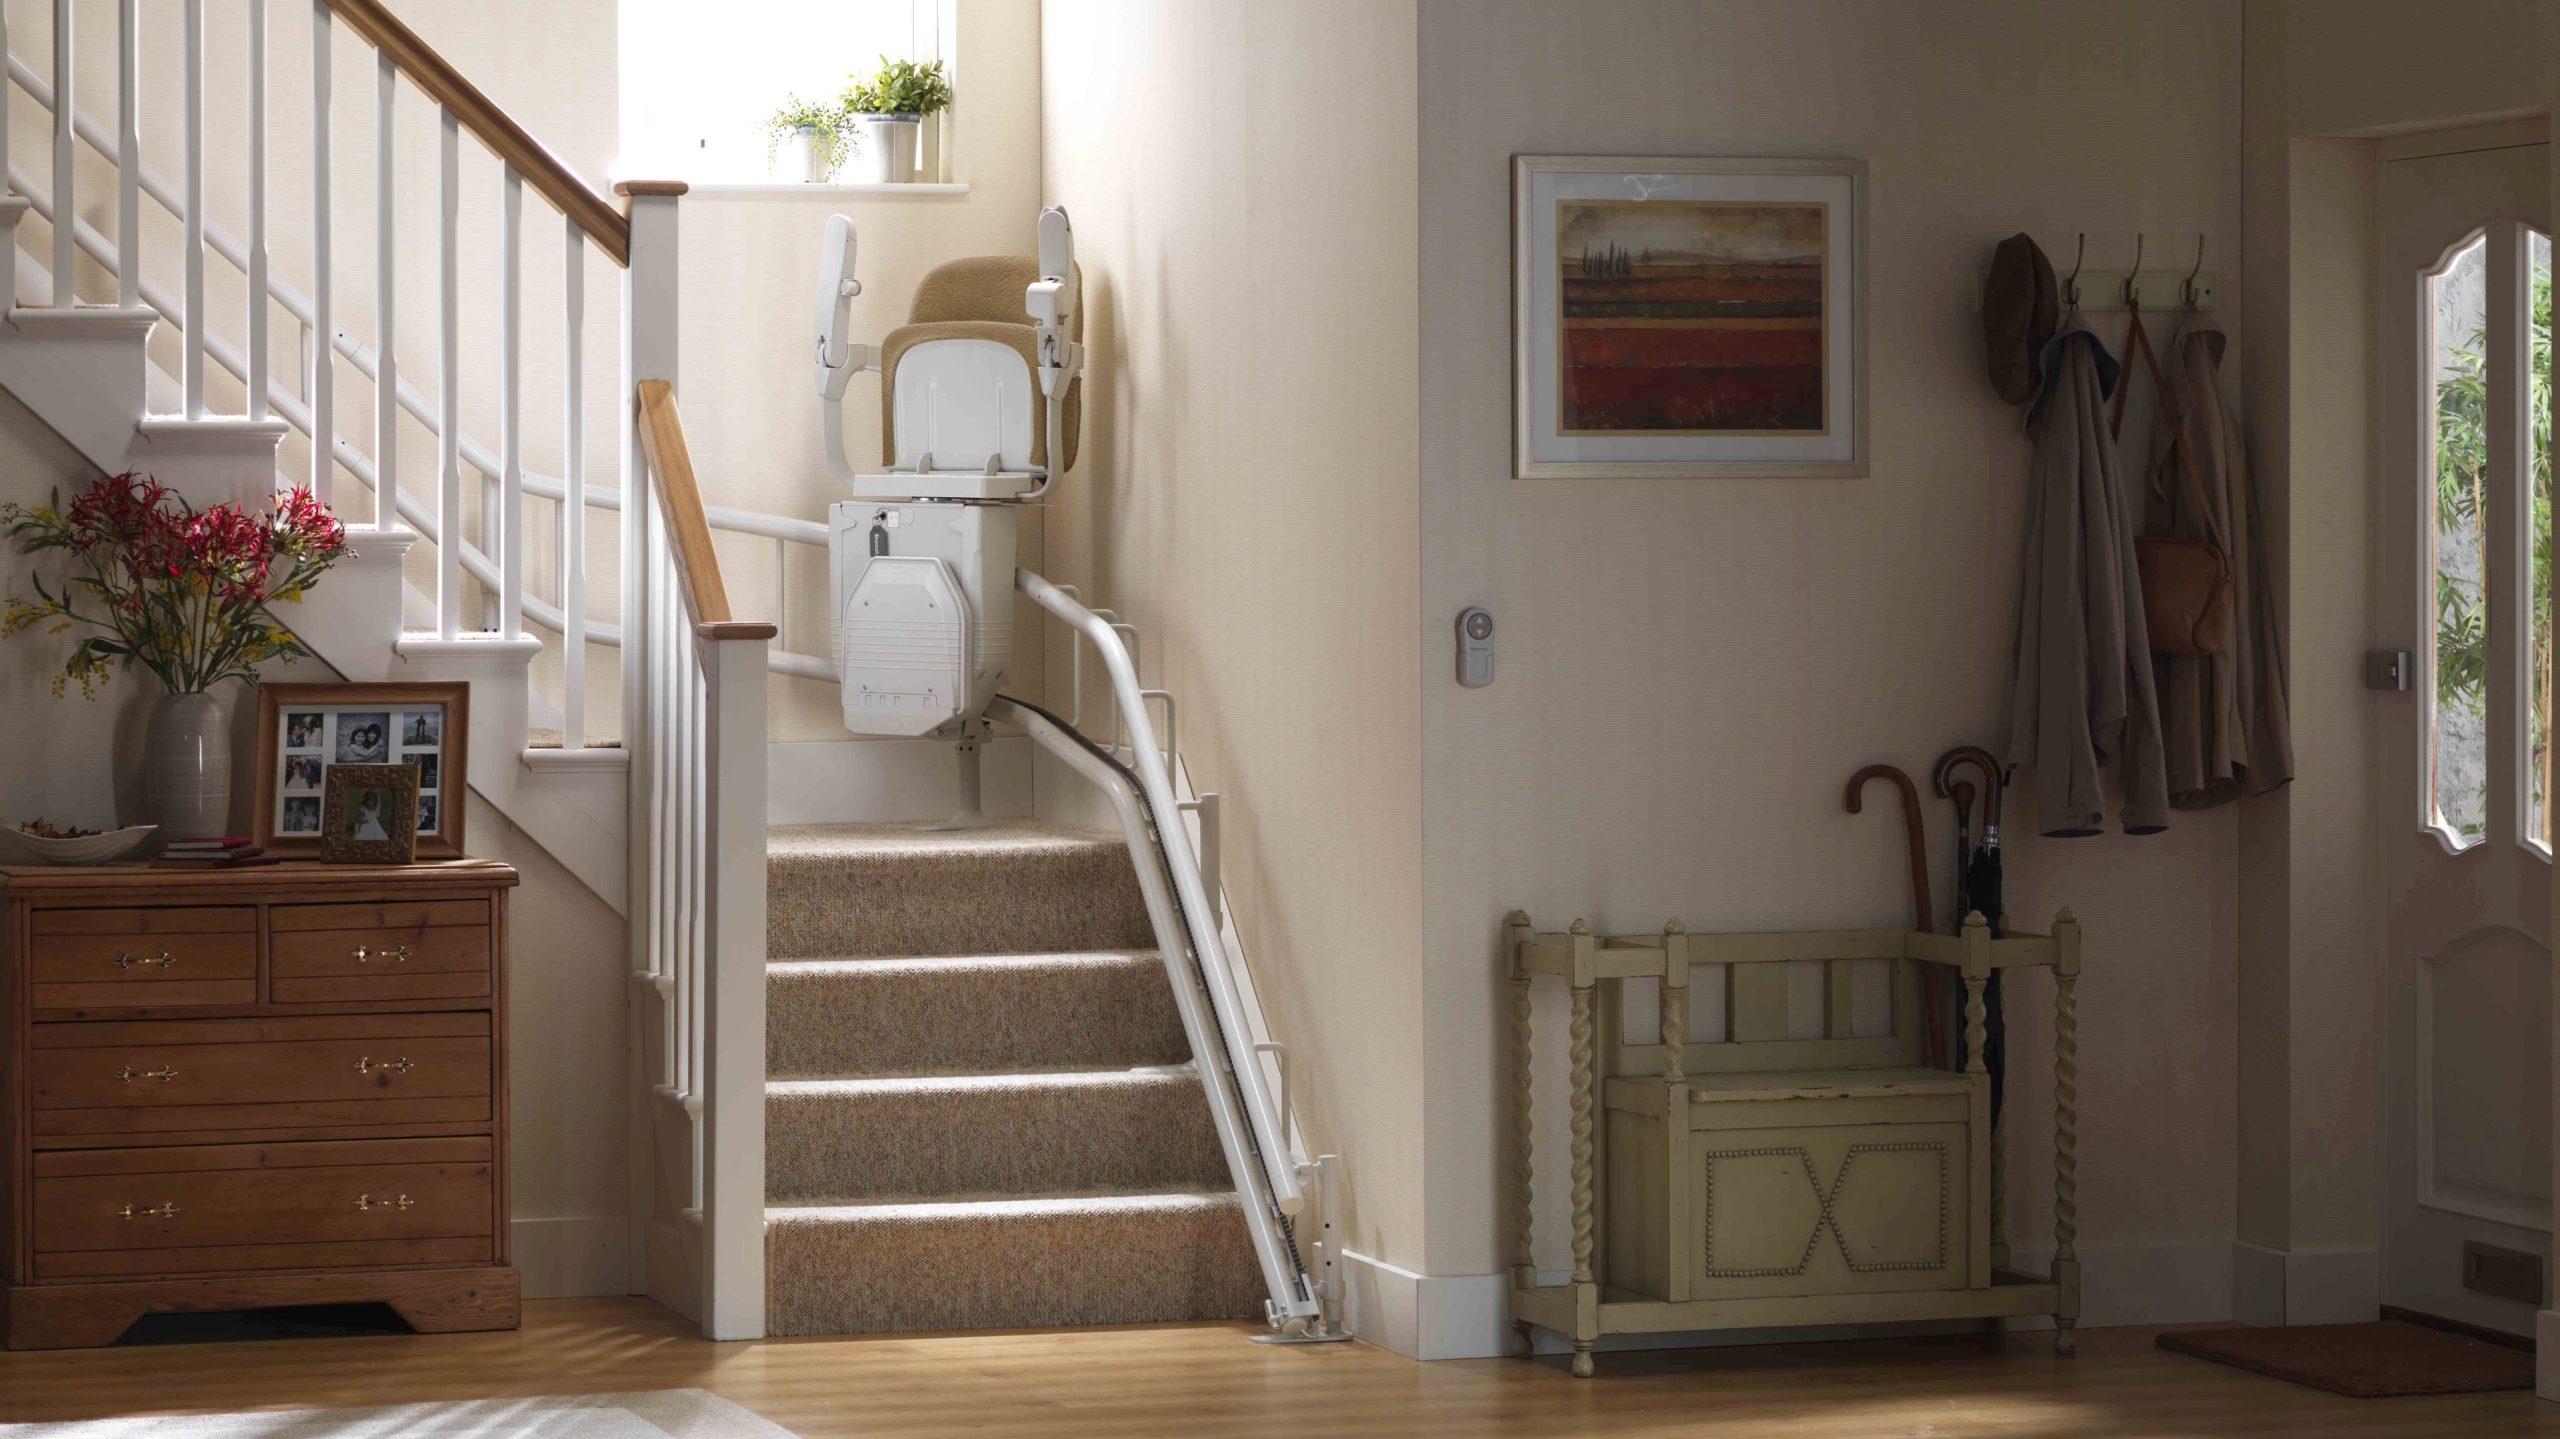 Stannah Siena curved stair lift with arms and seat up on the staircase. Arrow Lift.